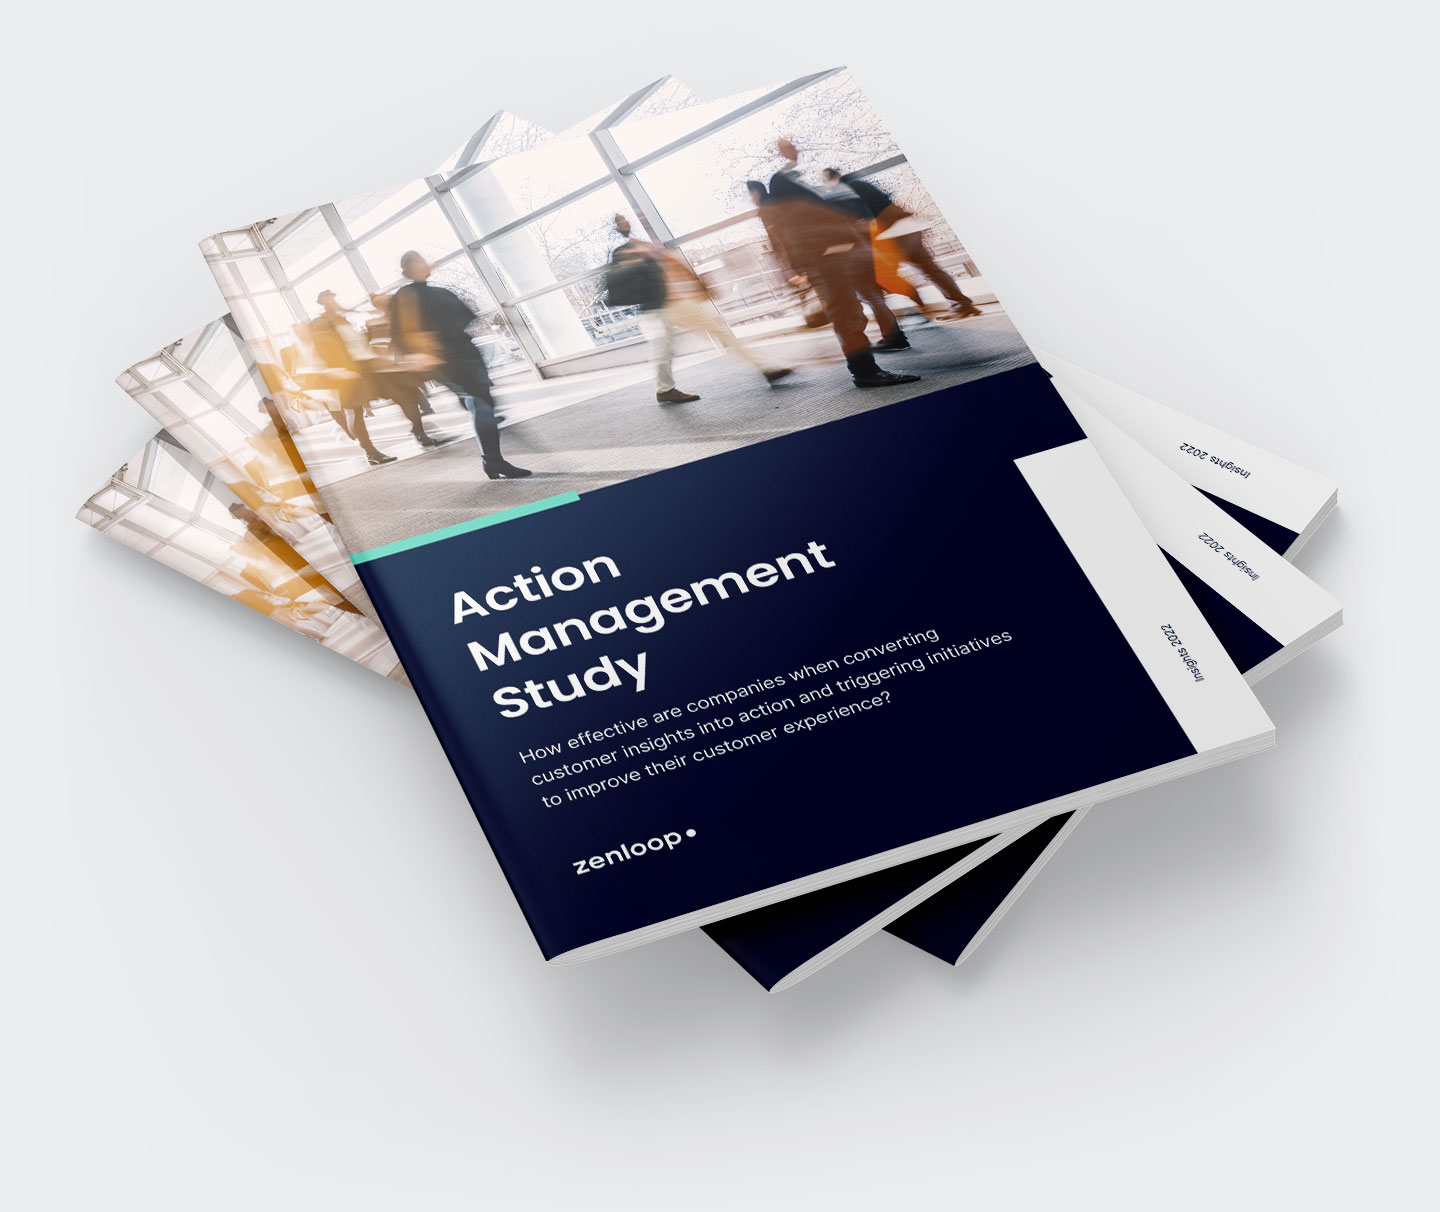 image of action management study